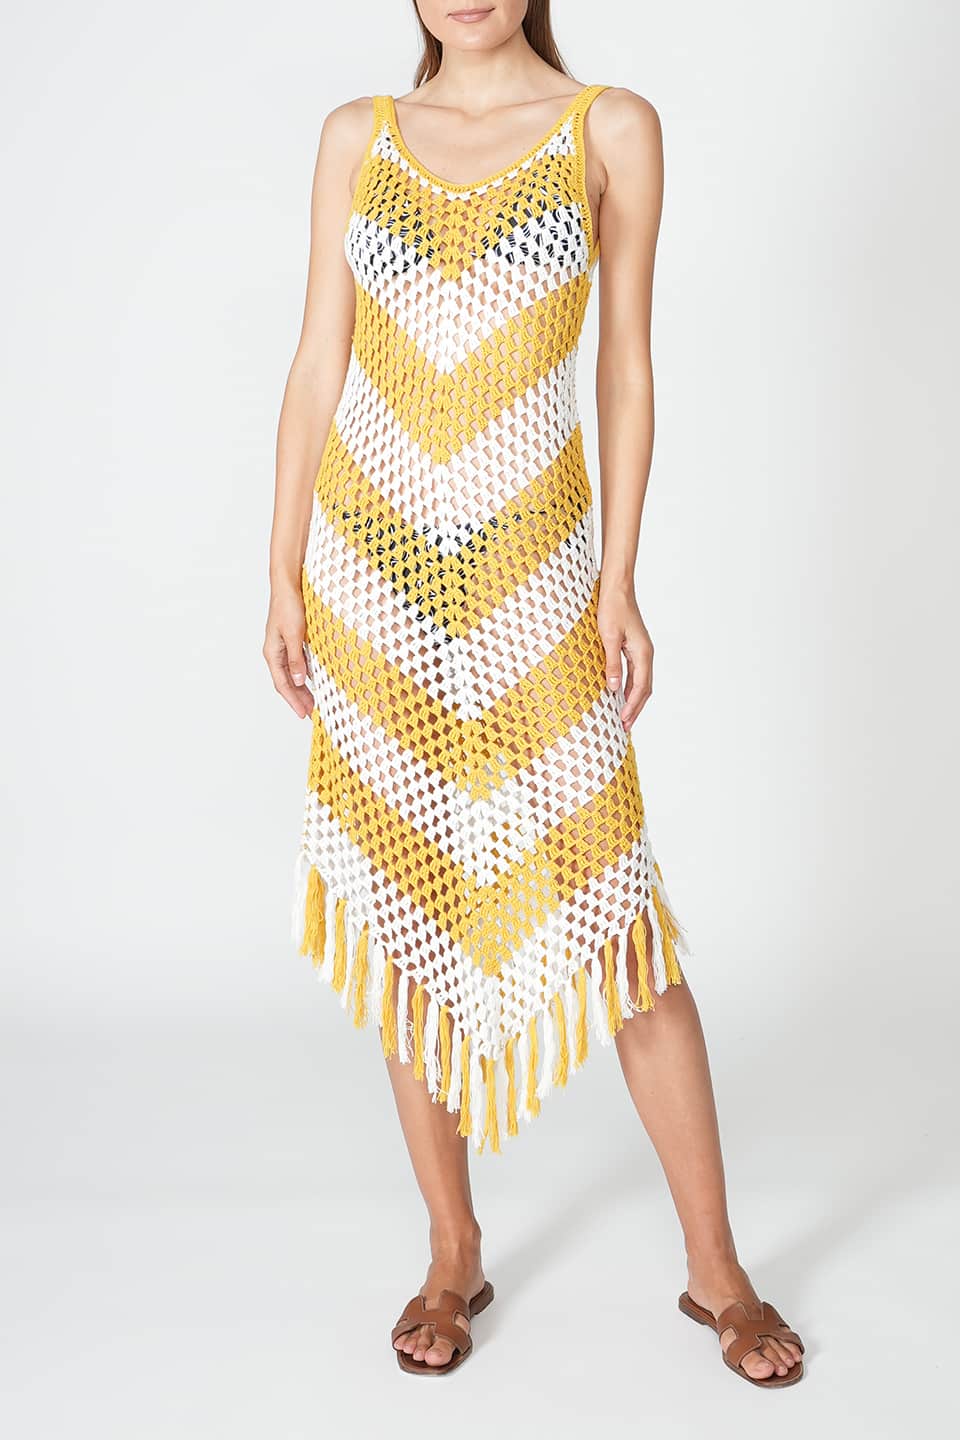 Thumbnail for Product gallery 1, Mellor Dress Yellow/White